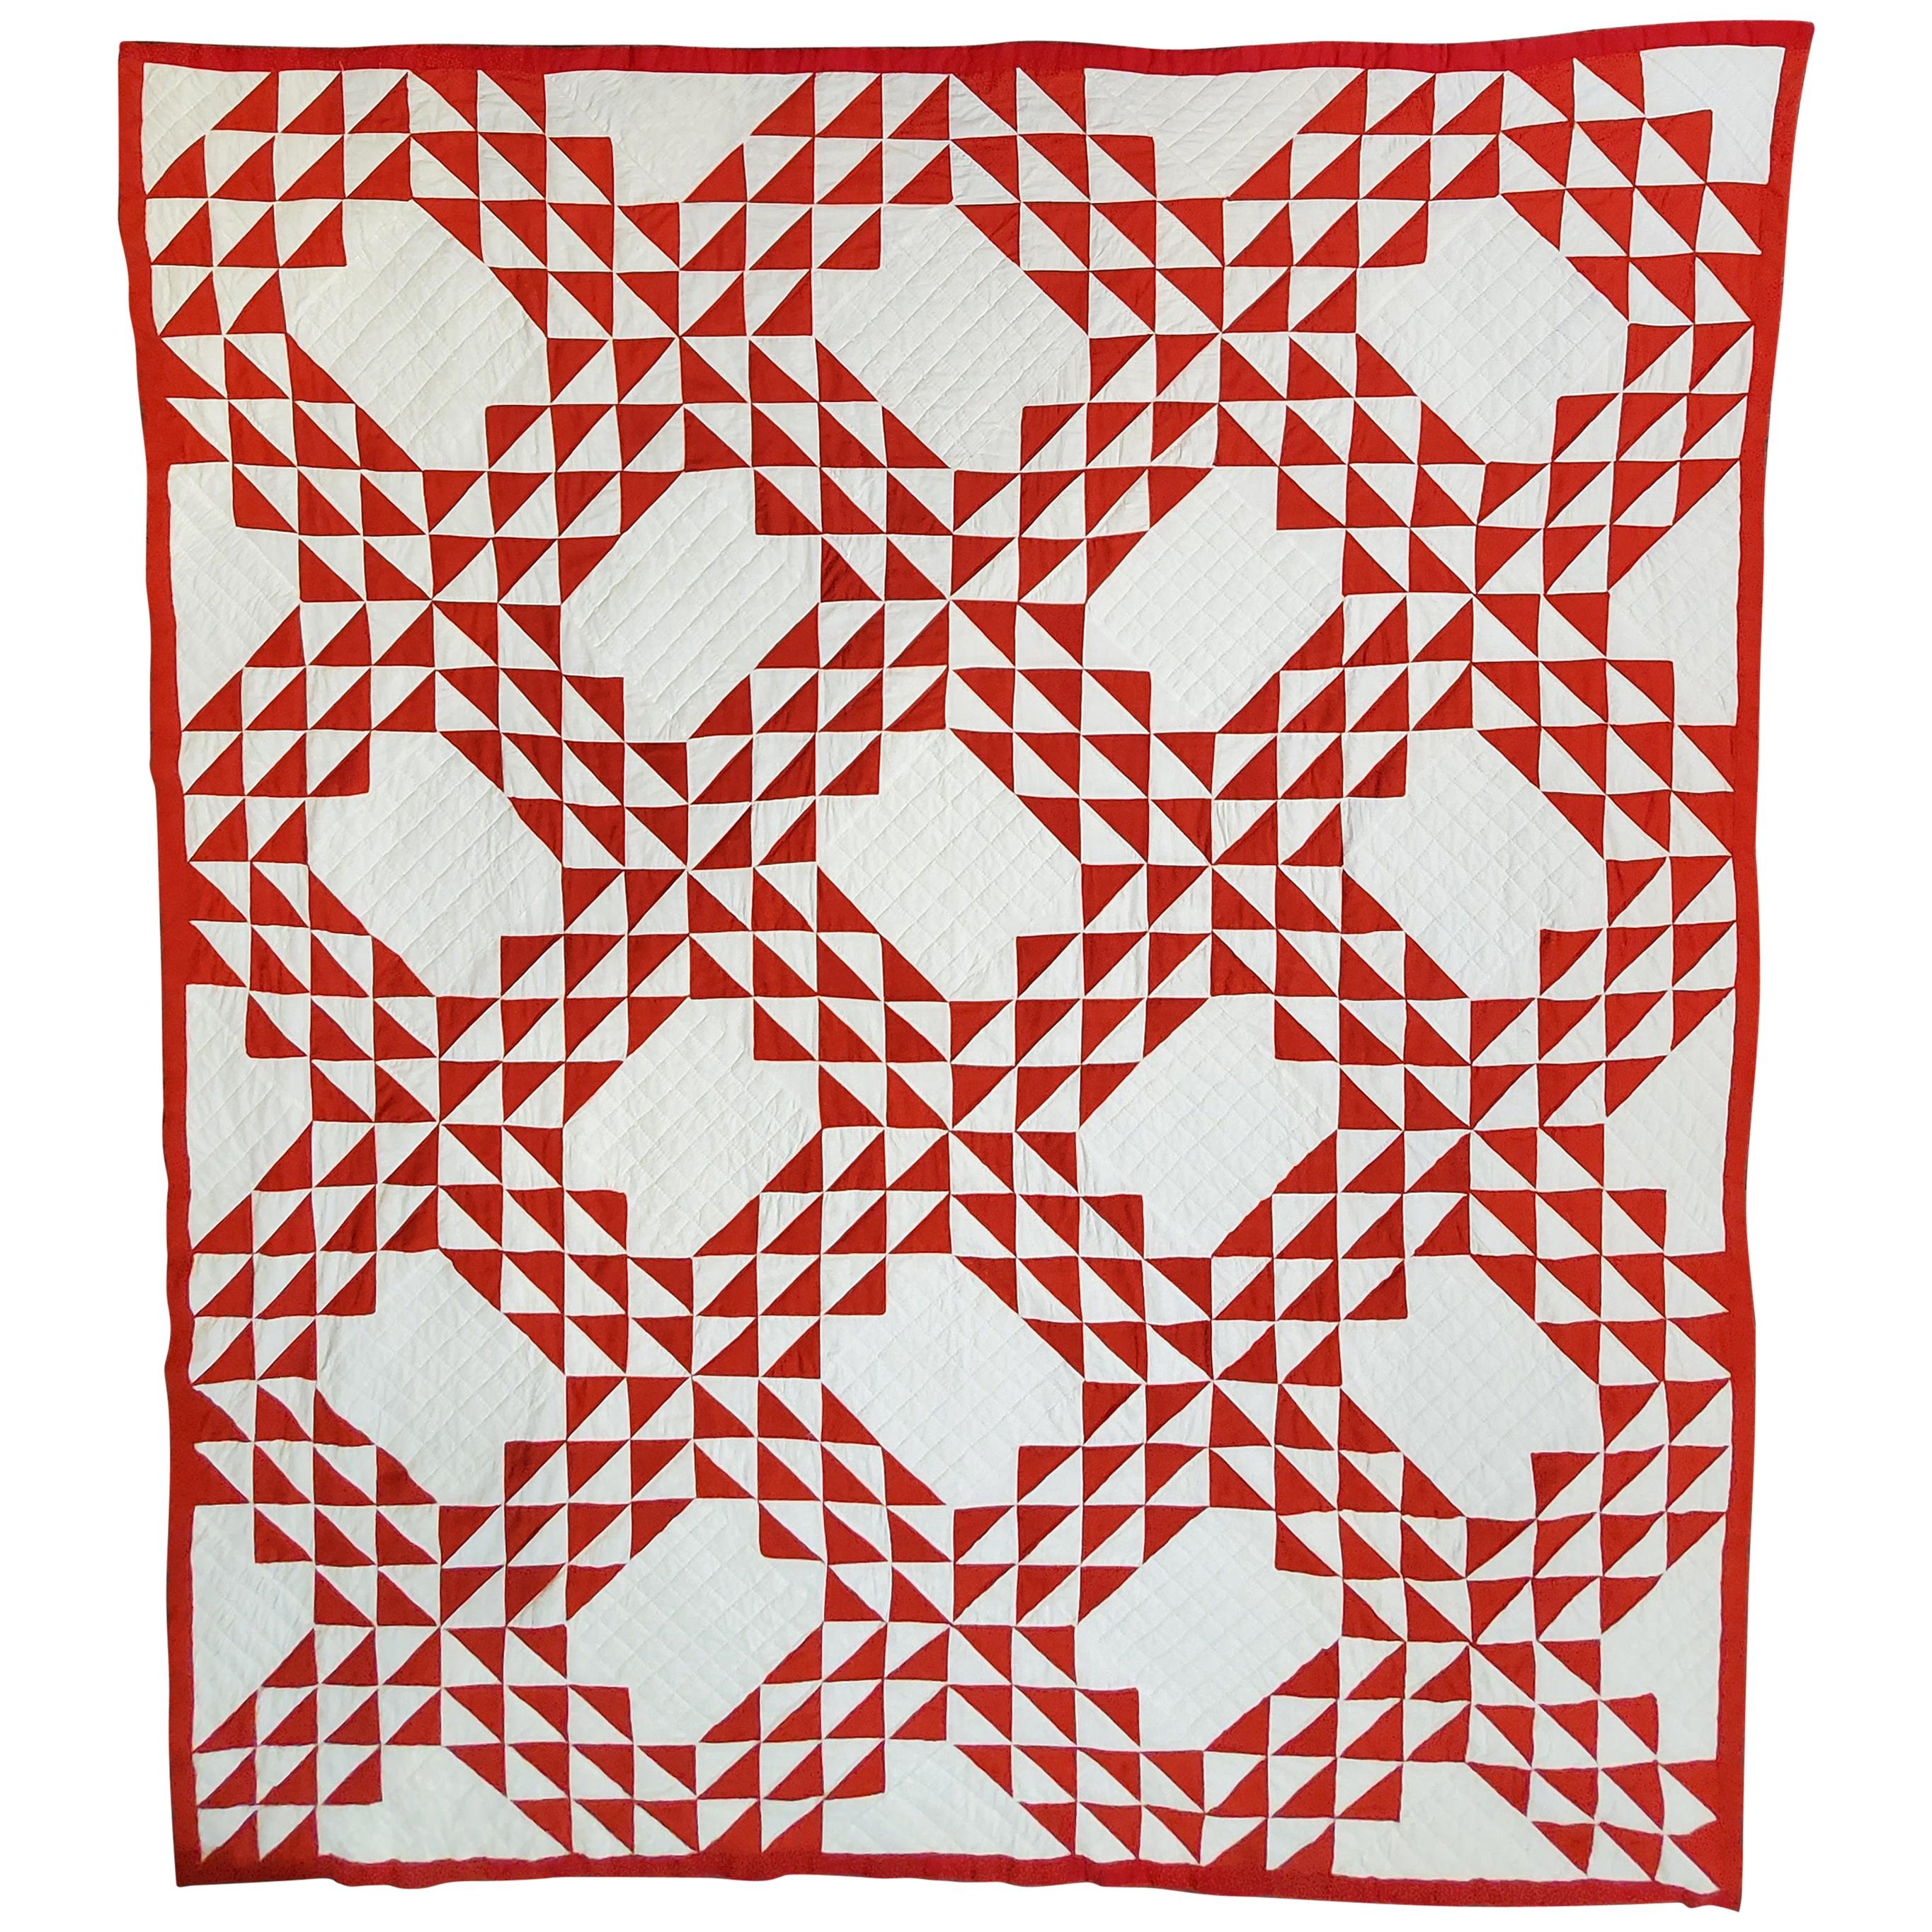 Early 20th Century Red and White Ocean Waves Quilt